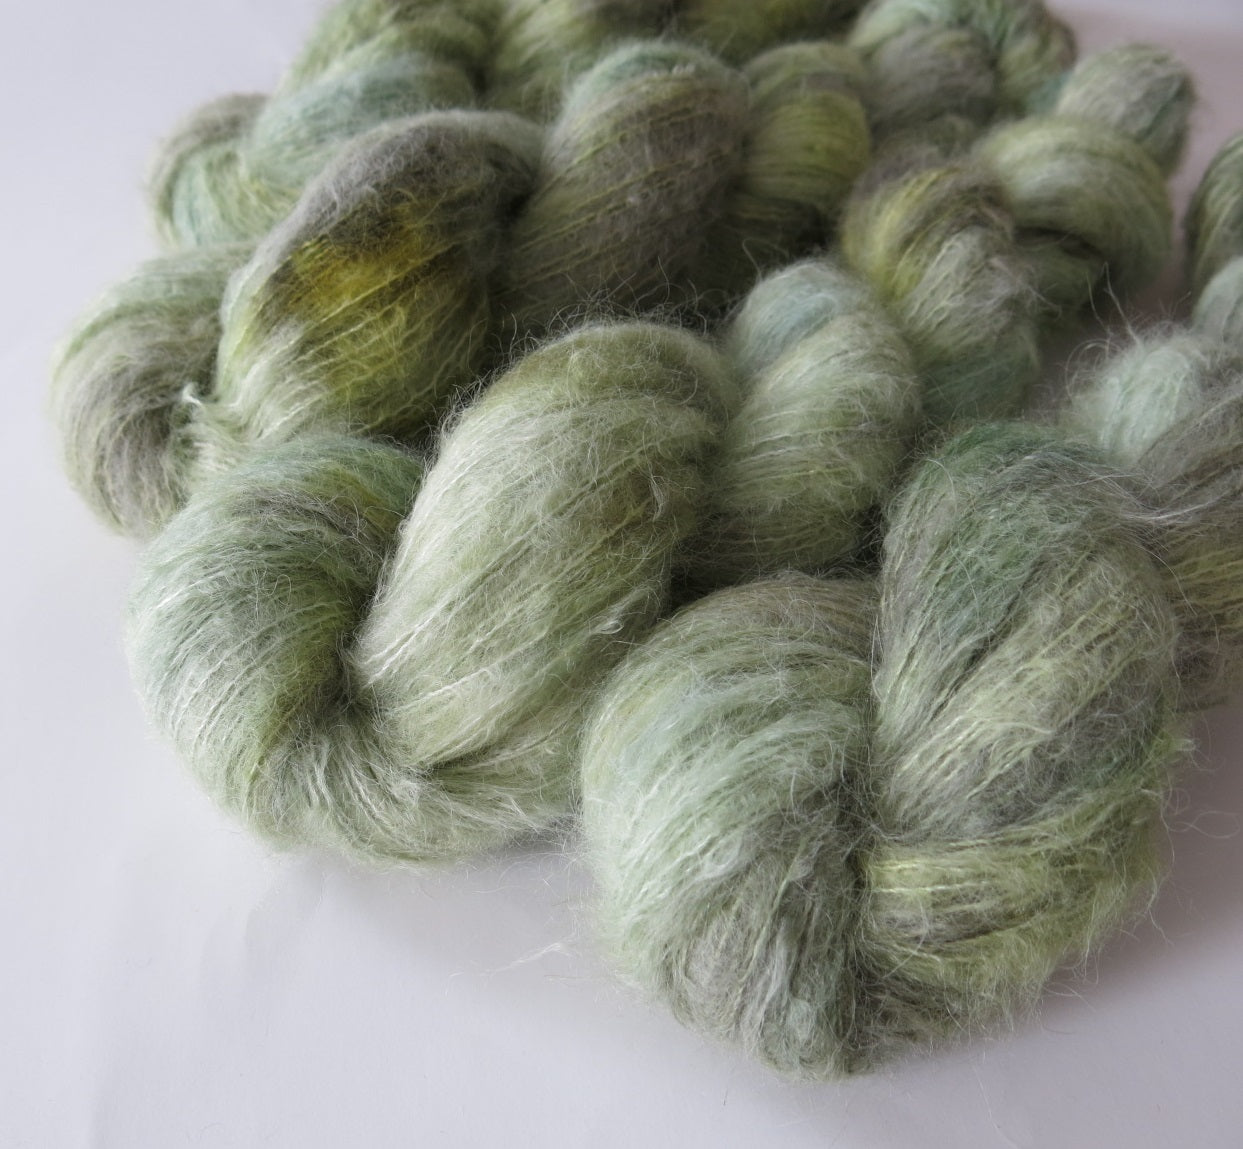 green glass indie dyed lace weight alpaca and silk yarn for knitting weaving and crochet